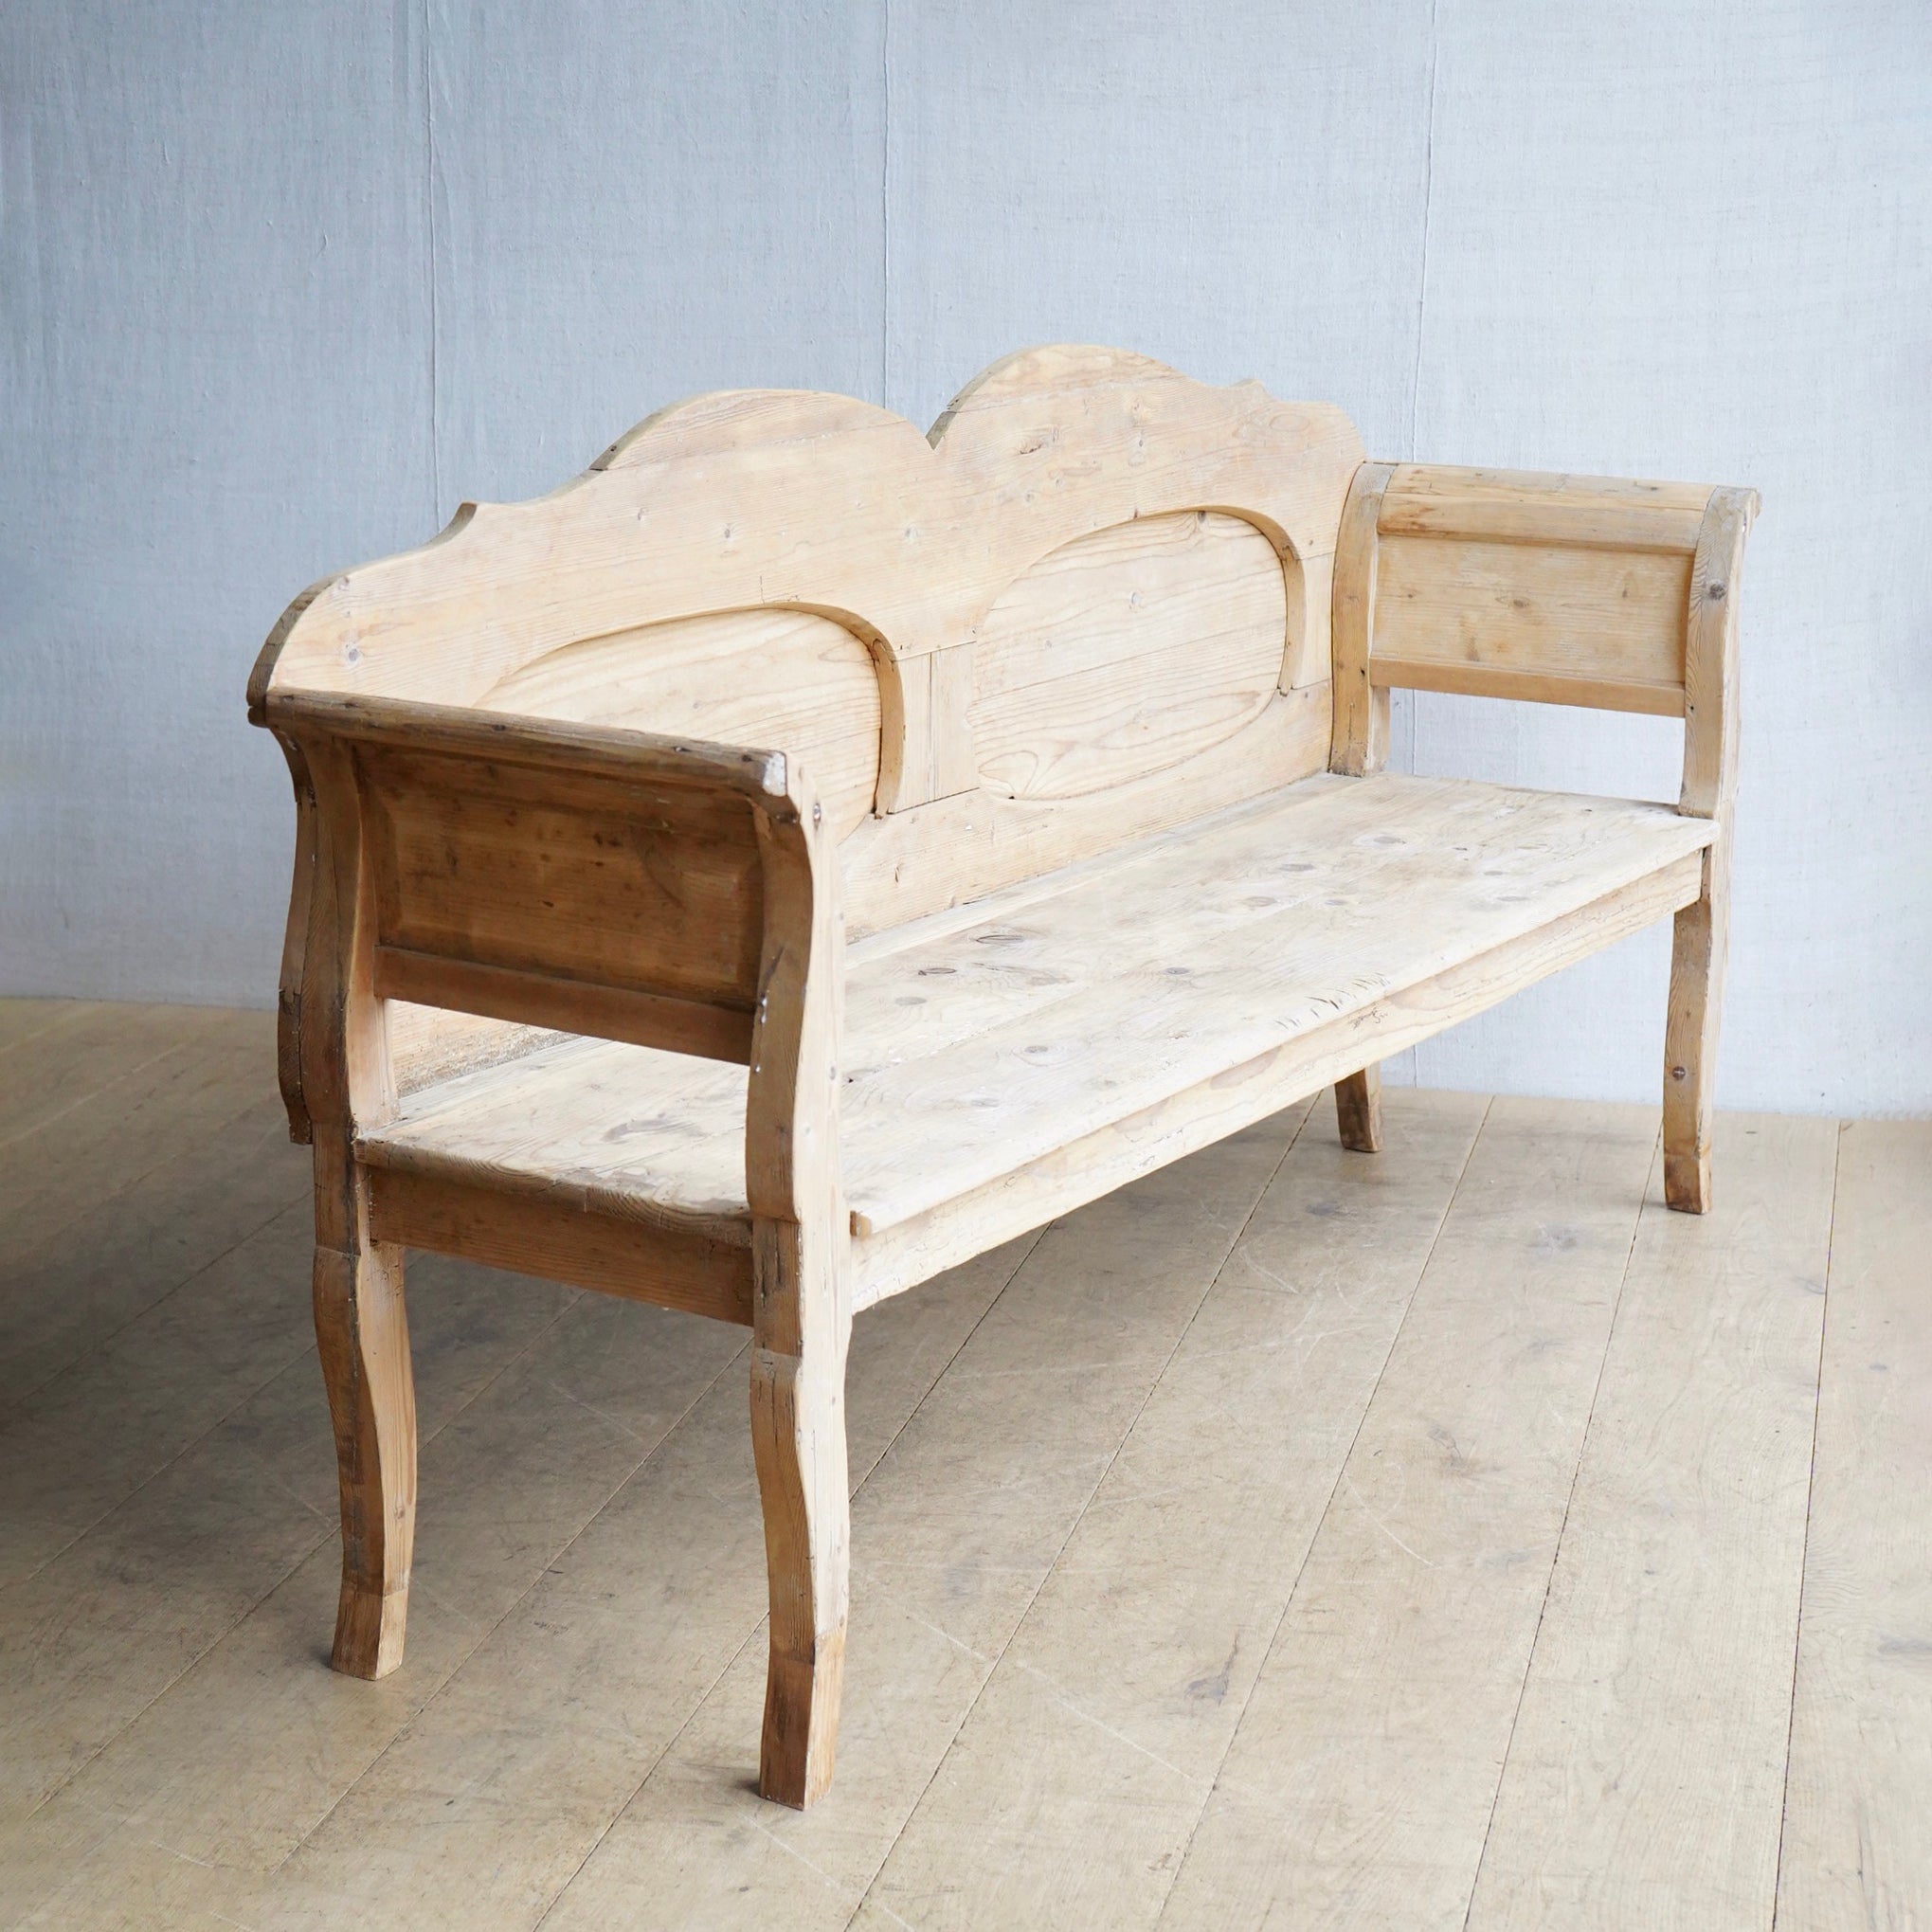 Stripped Hungarian Bench